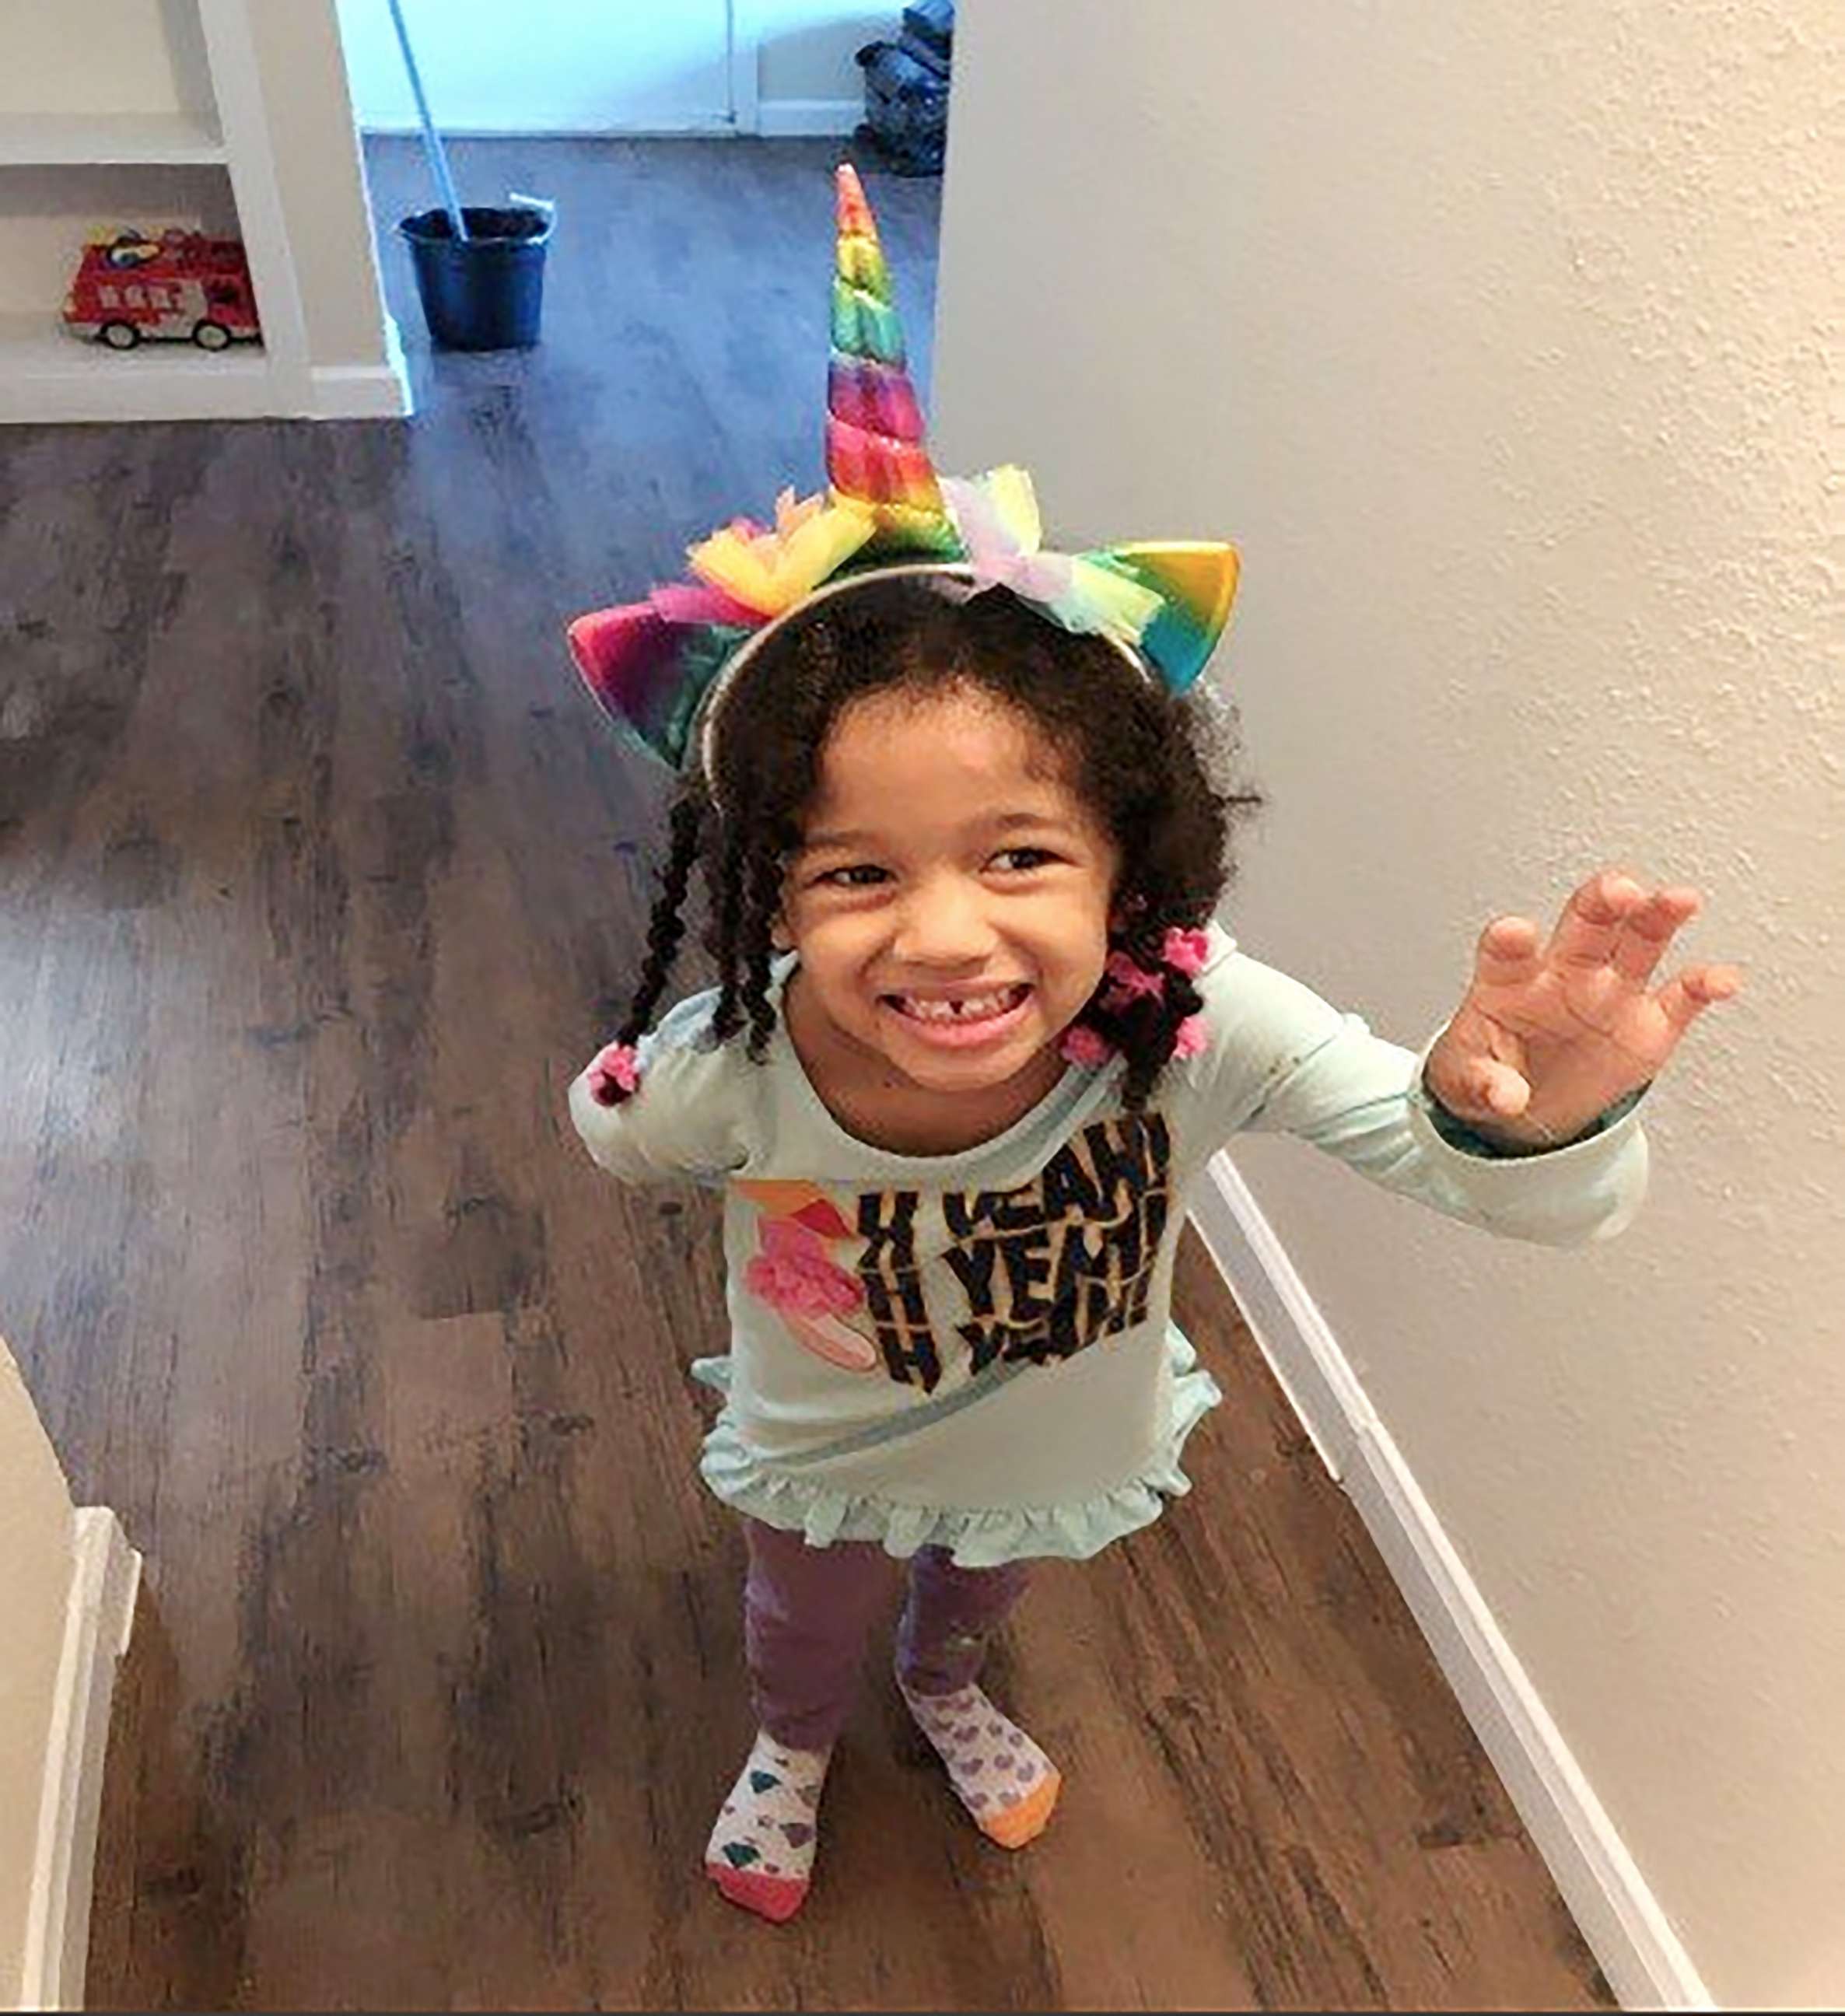 PHOTO: An Amber alert was issued Sunday for 4-year-old Texas girl, Maleah Davis. She was last seen on Saturday night with three men that her mother's ex-fiance claimed abducted her. 